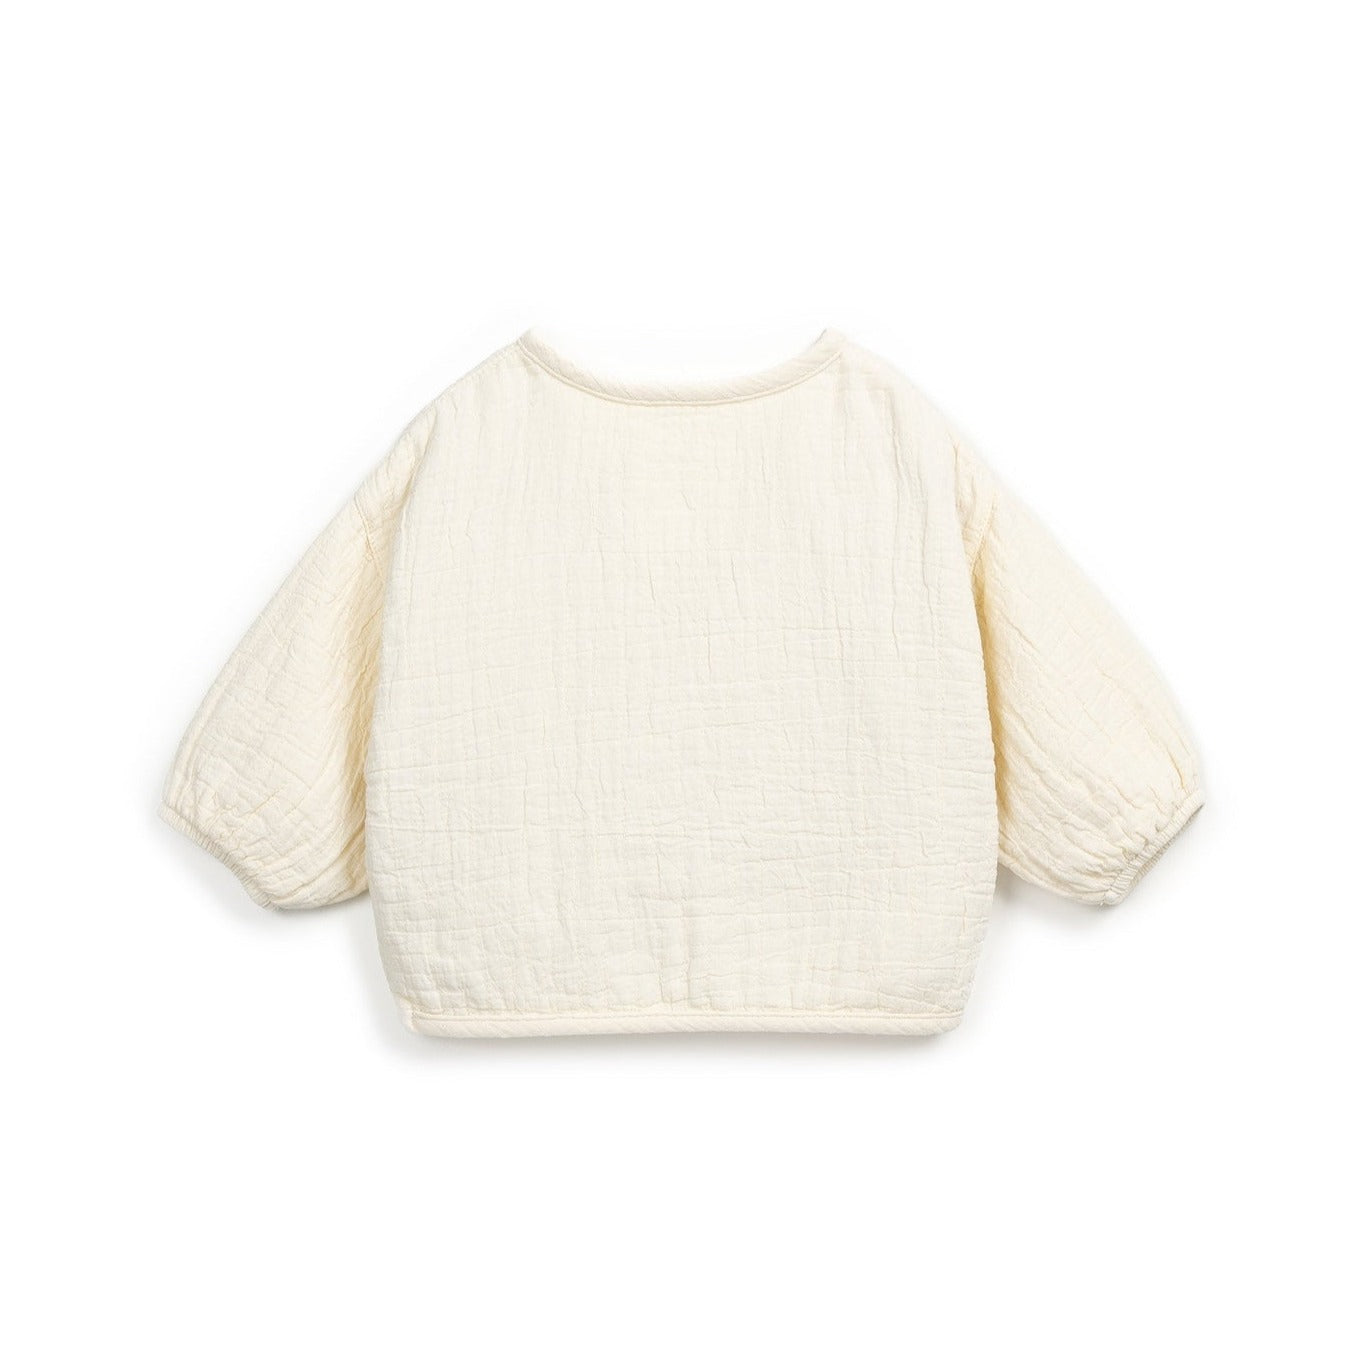 PLAY-UP / Woven cardigan, BABY